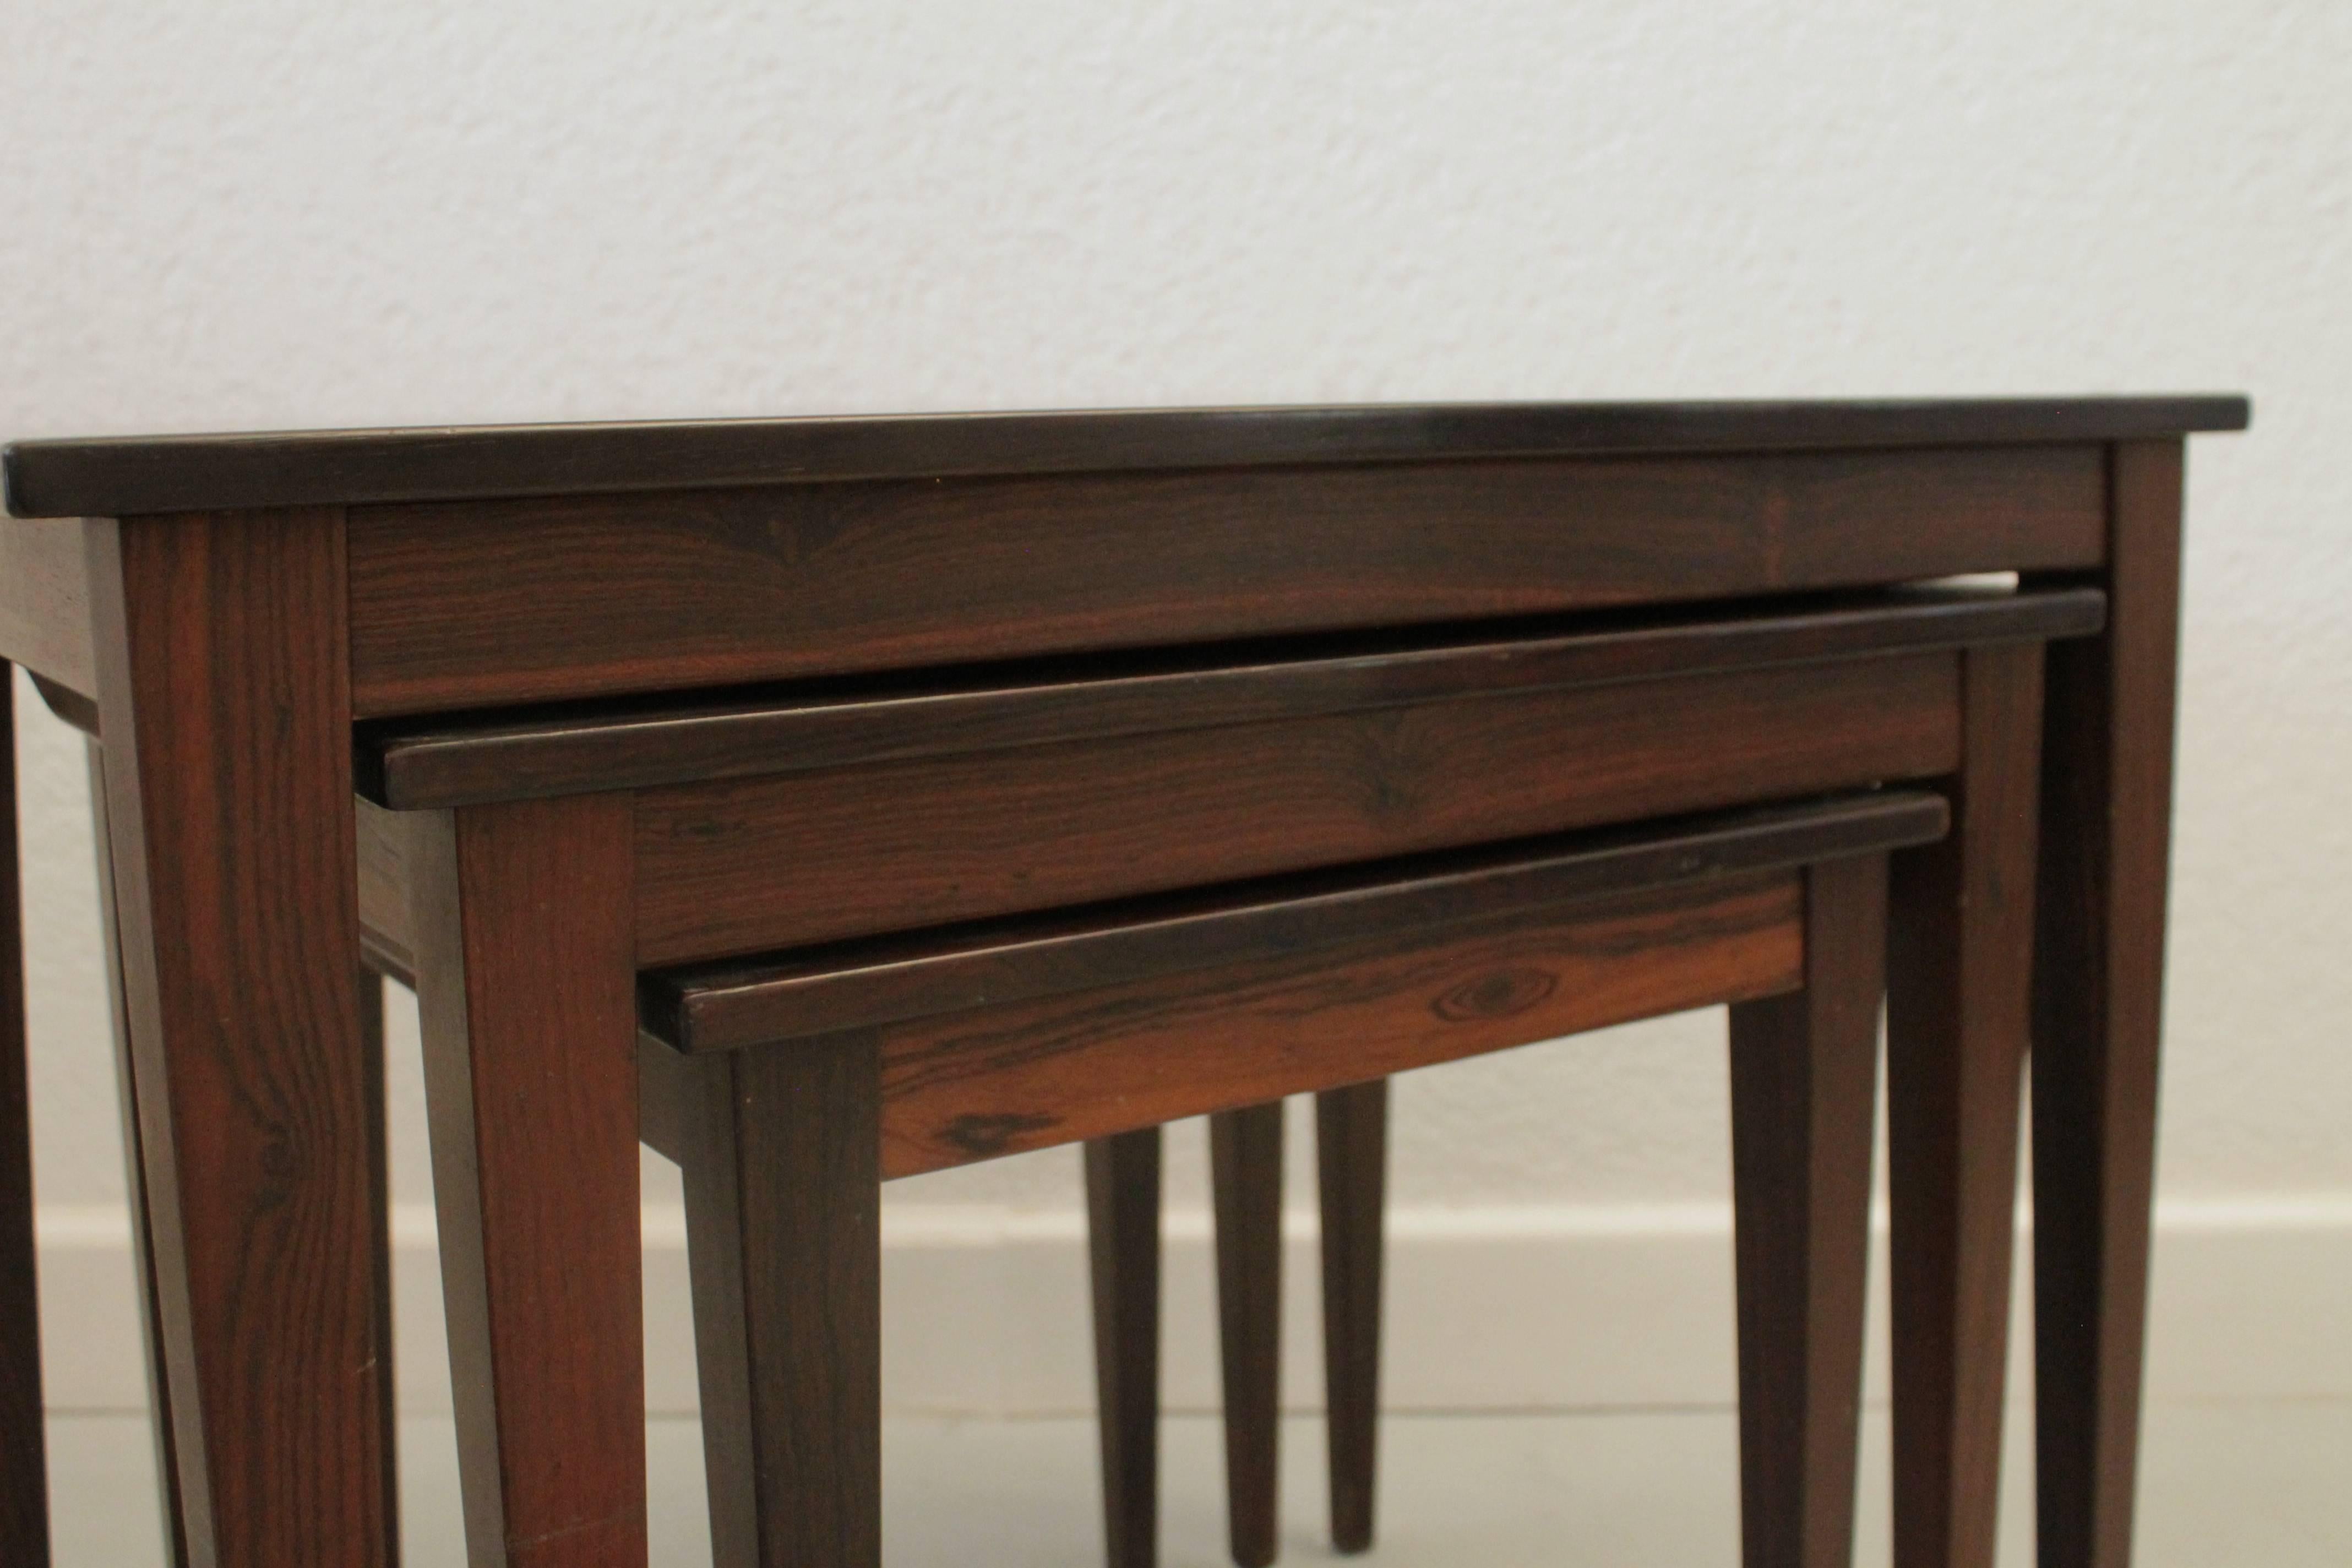 Set of three rosewood nesting tables.
Very good condition. Legs are easily dismountable for shipping.